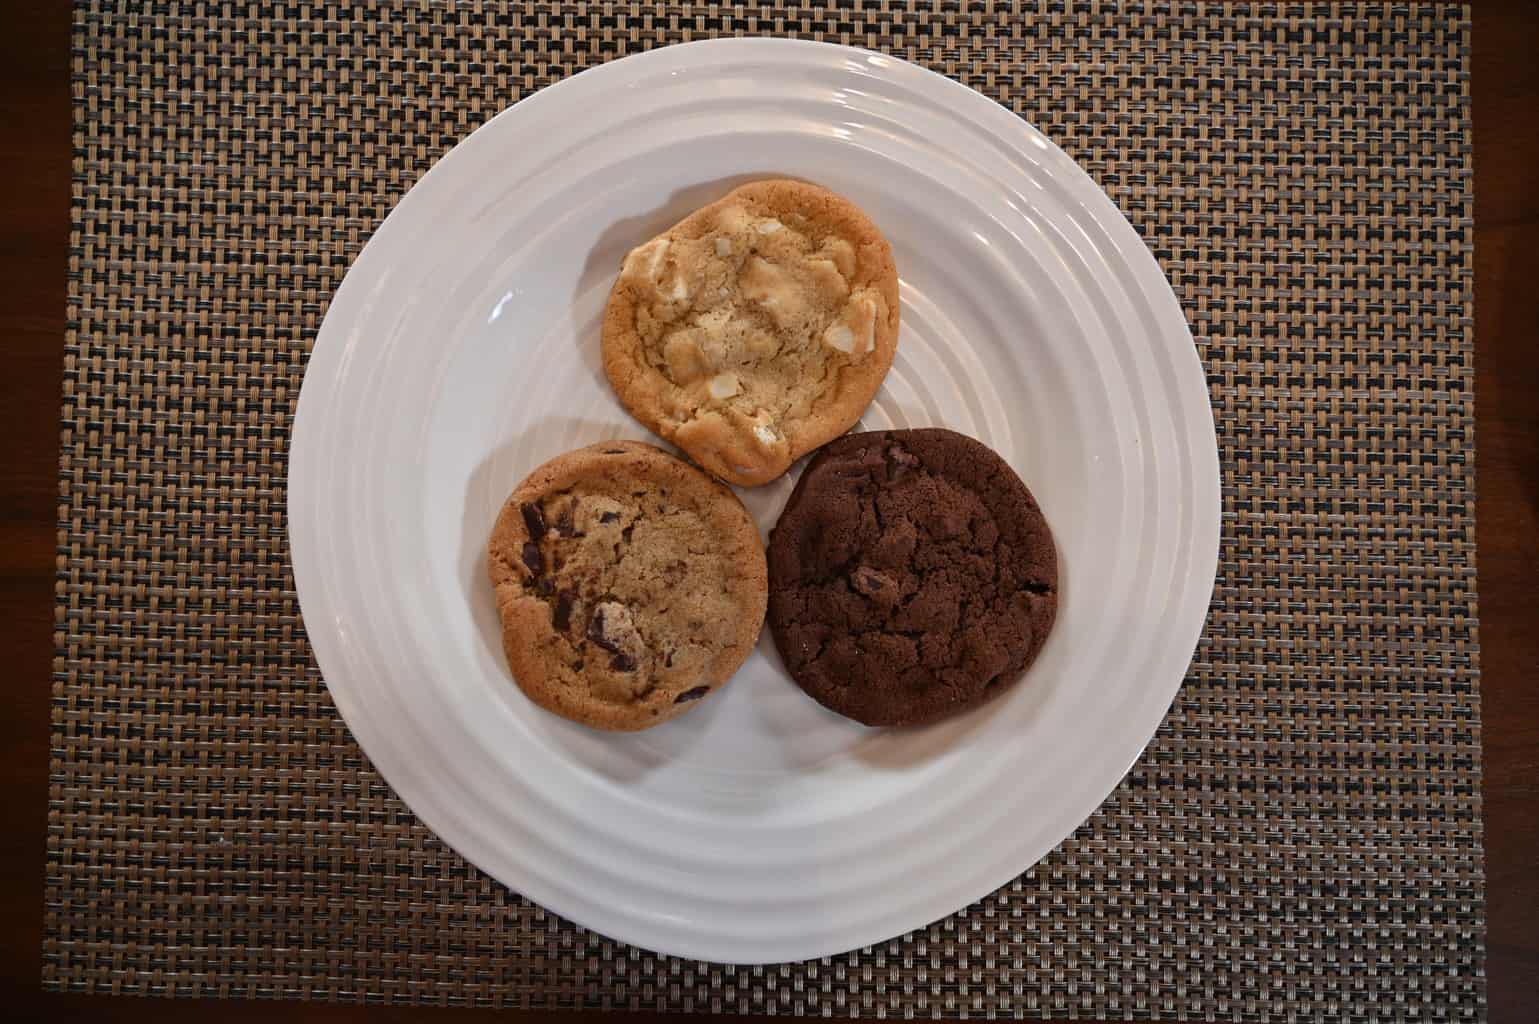 A white chocolate macadamia nut cookie, a triple chocolate cookie and a chocolate chunk cookie on a plate photographed from above.